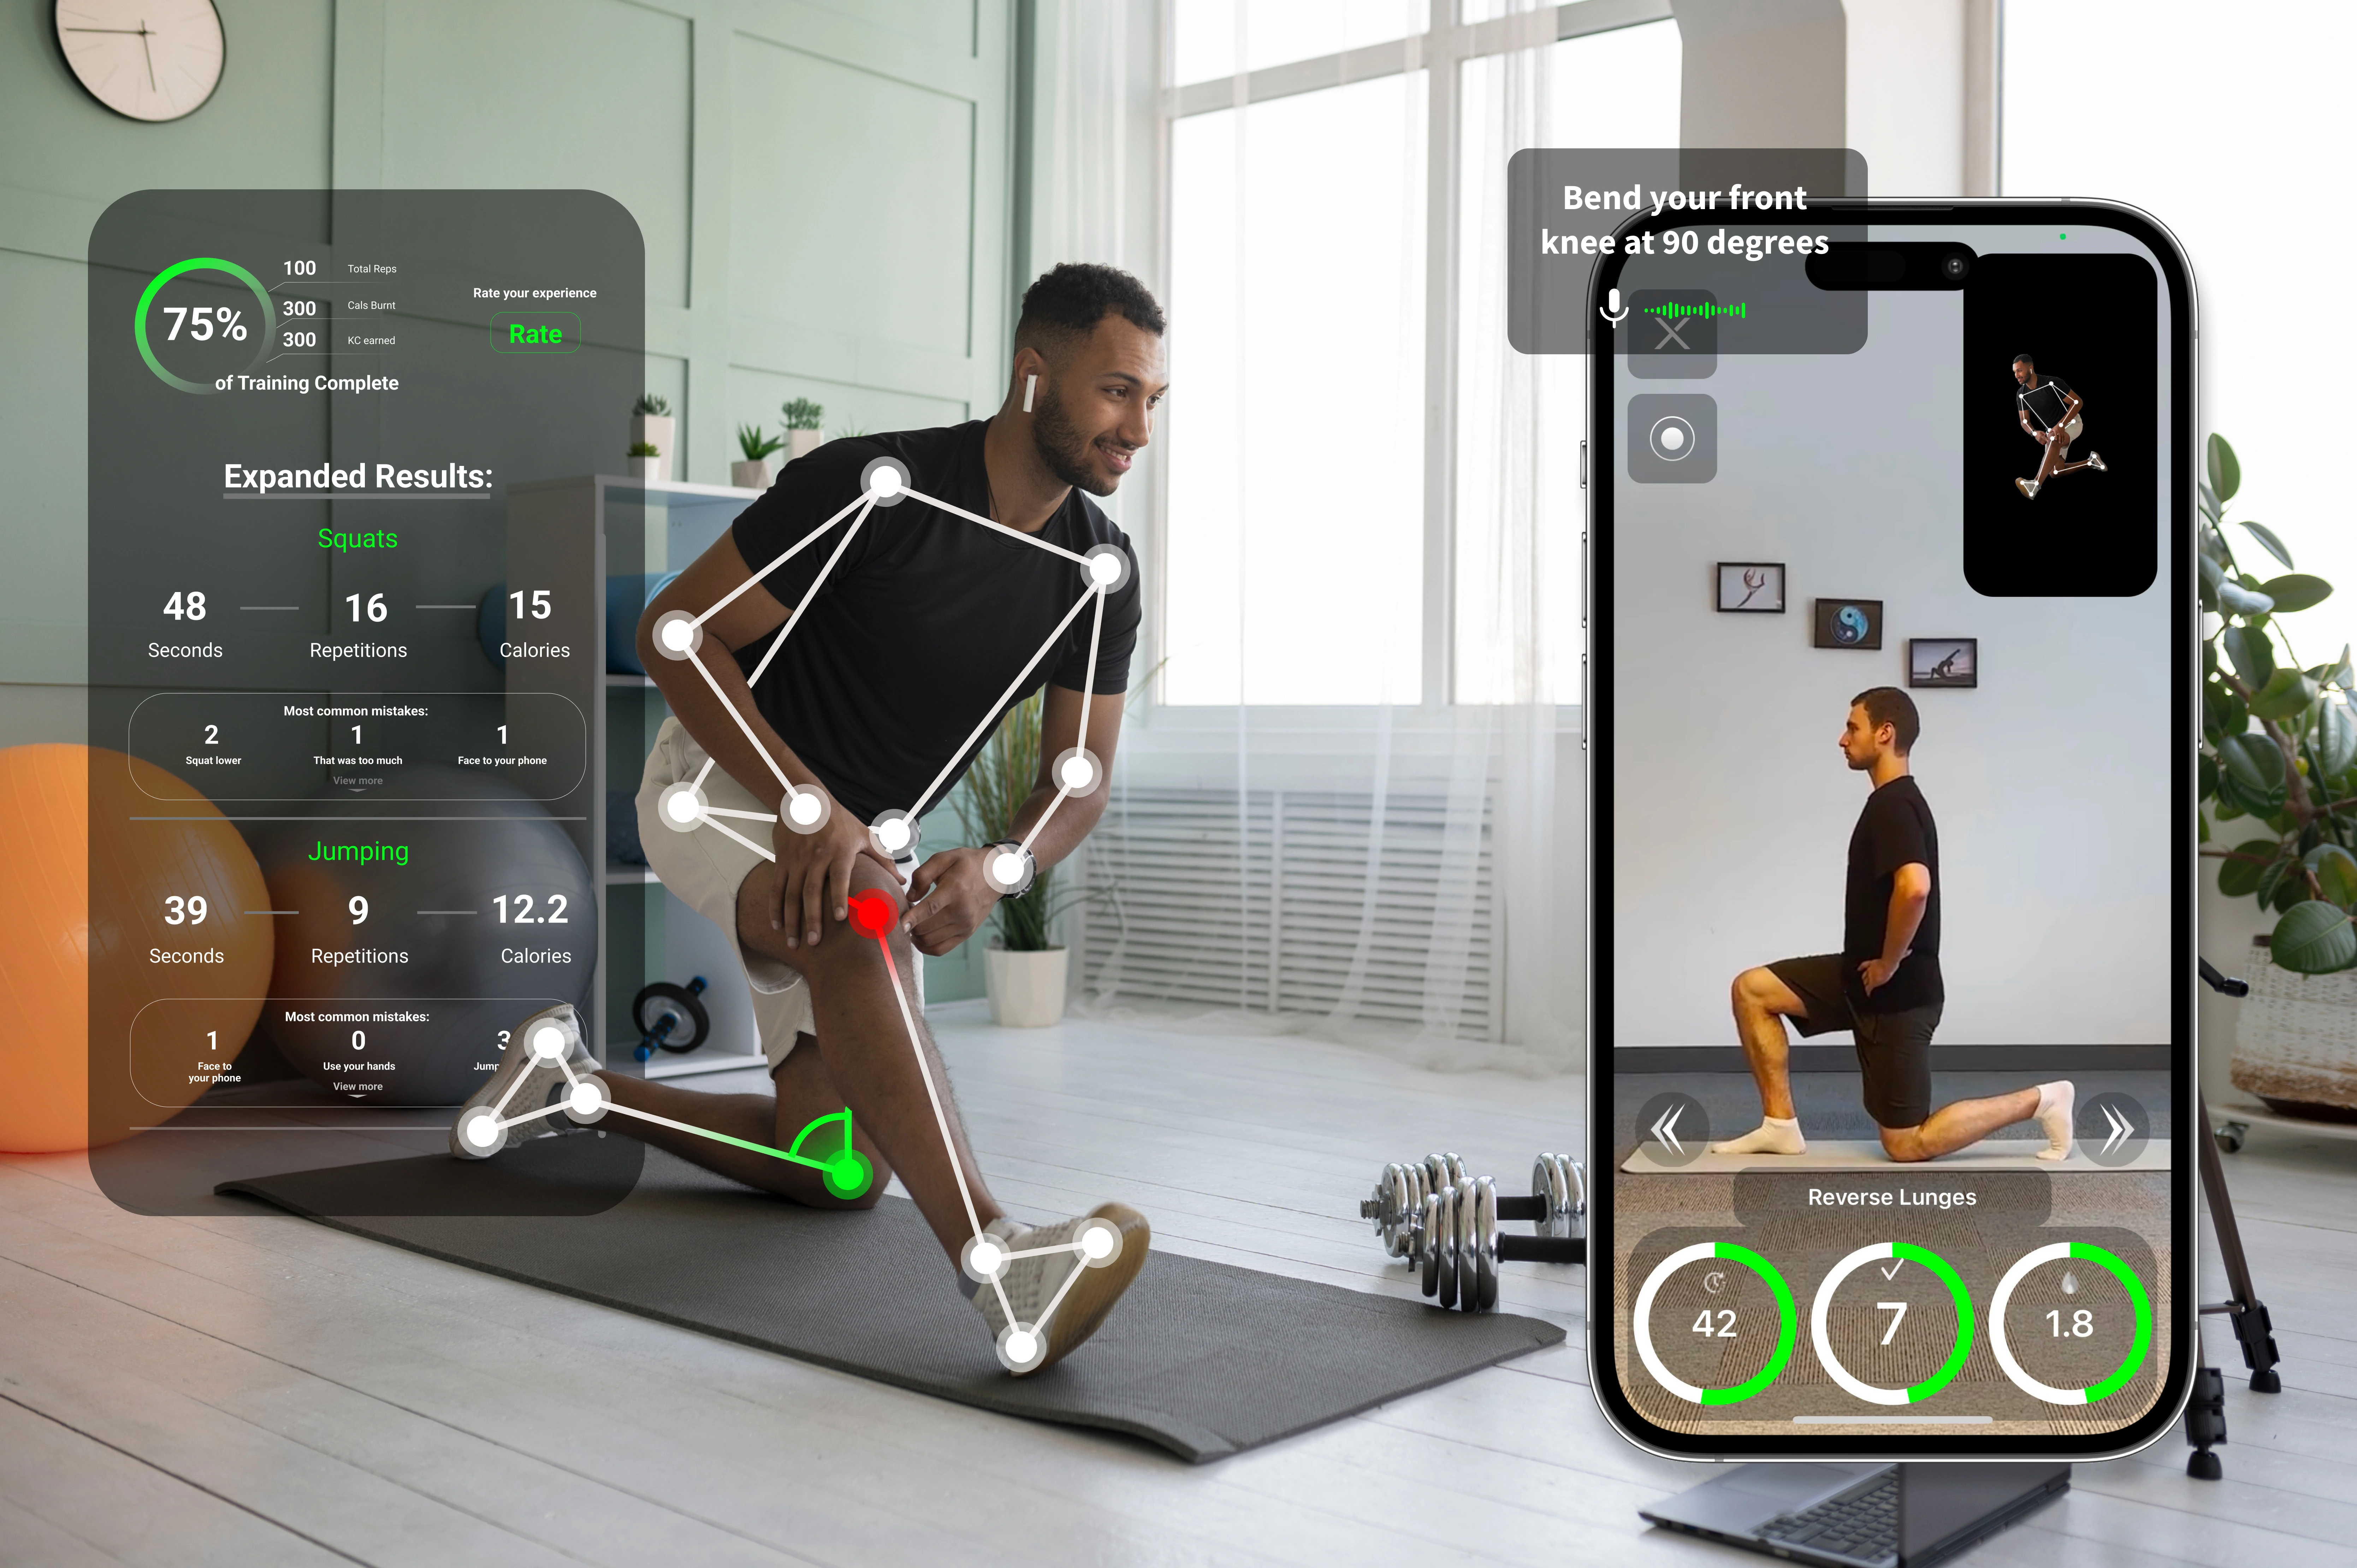 Online Fitness and Physio - KinesteX